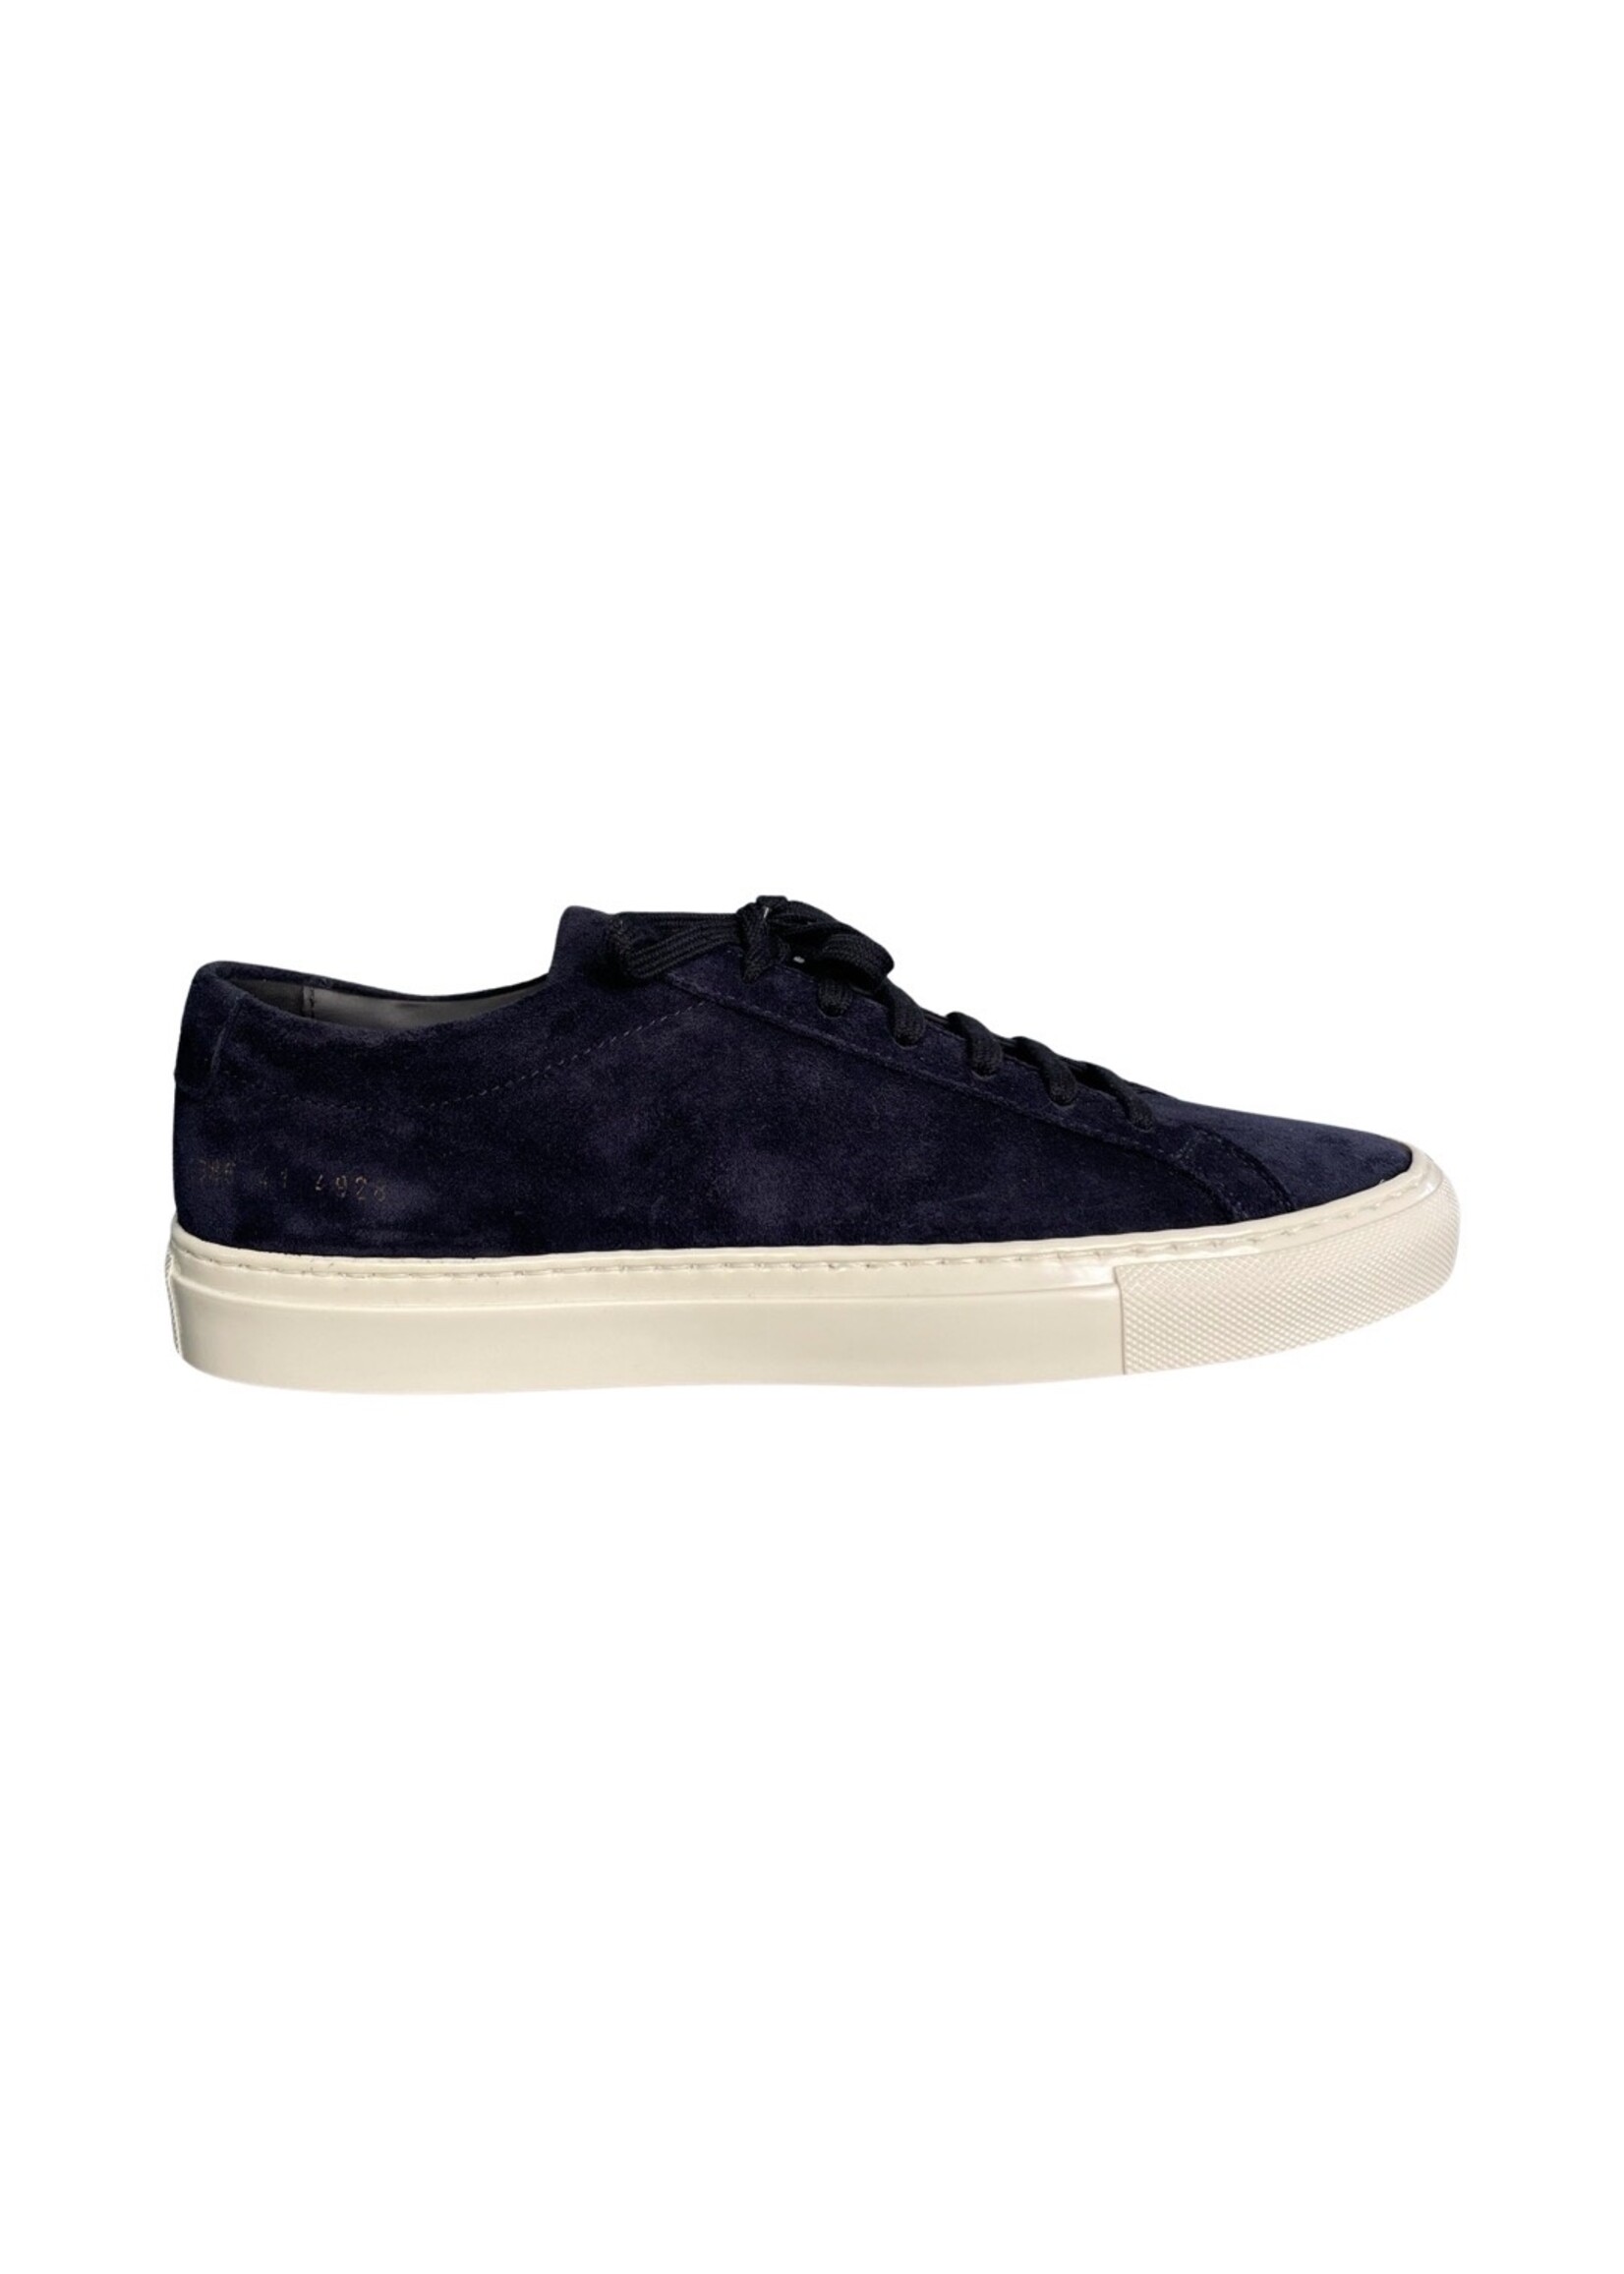 COMMON PROJECTS ACHILLES LOW WAXED SUEDE SNEAKER